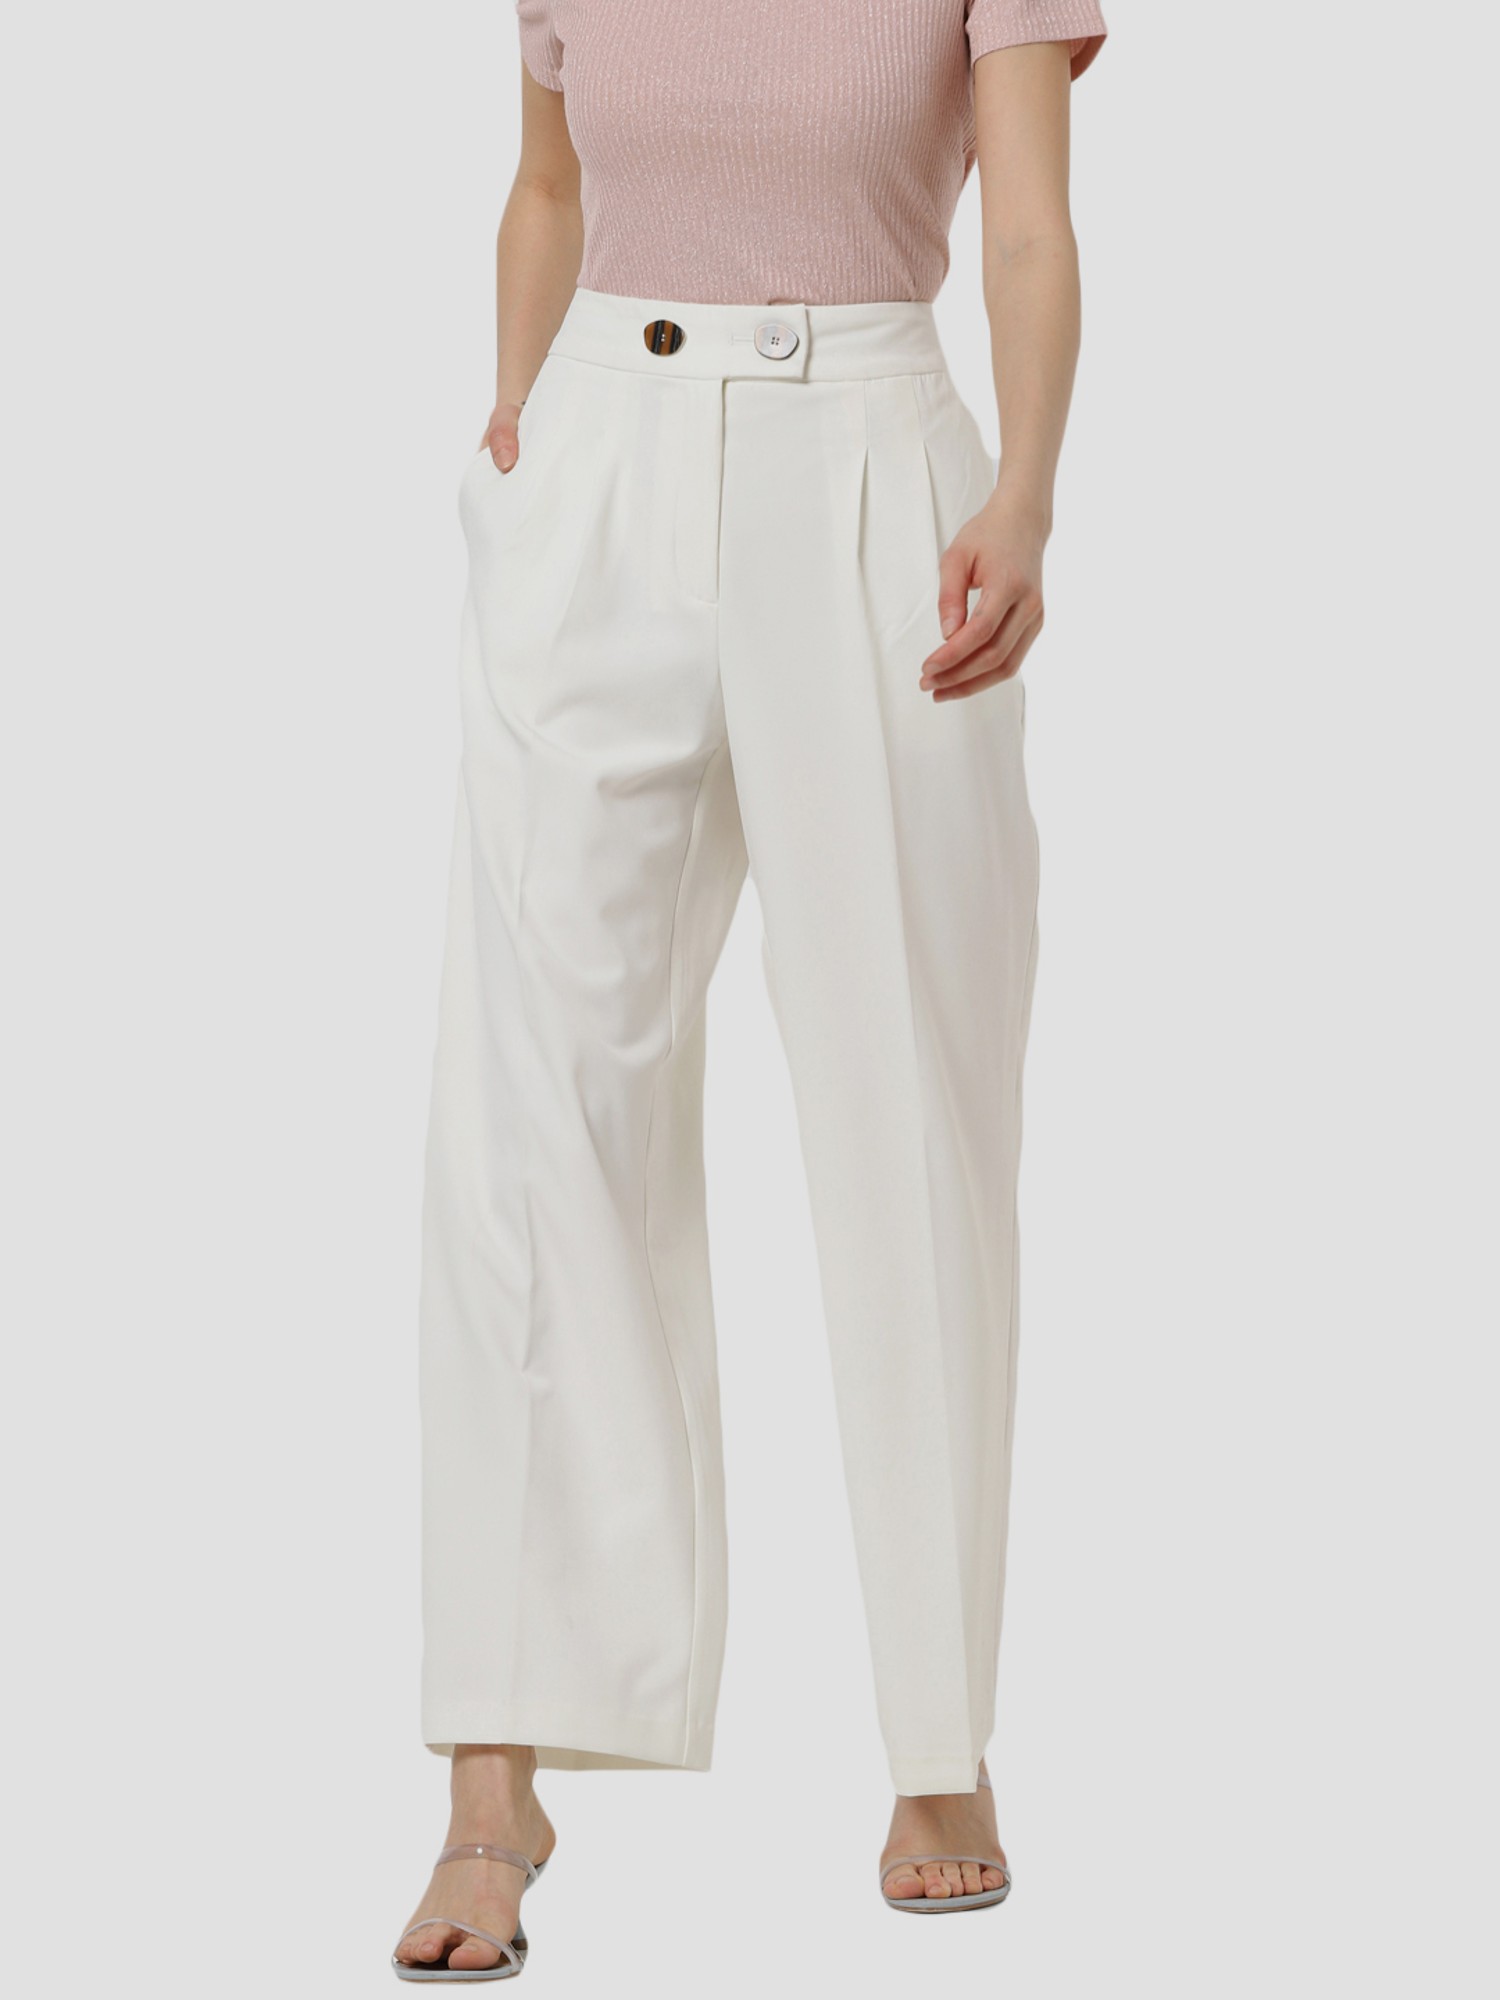 Buy Off White Trousers  Pants for Women by Outryt Online  Ajiocom